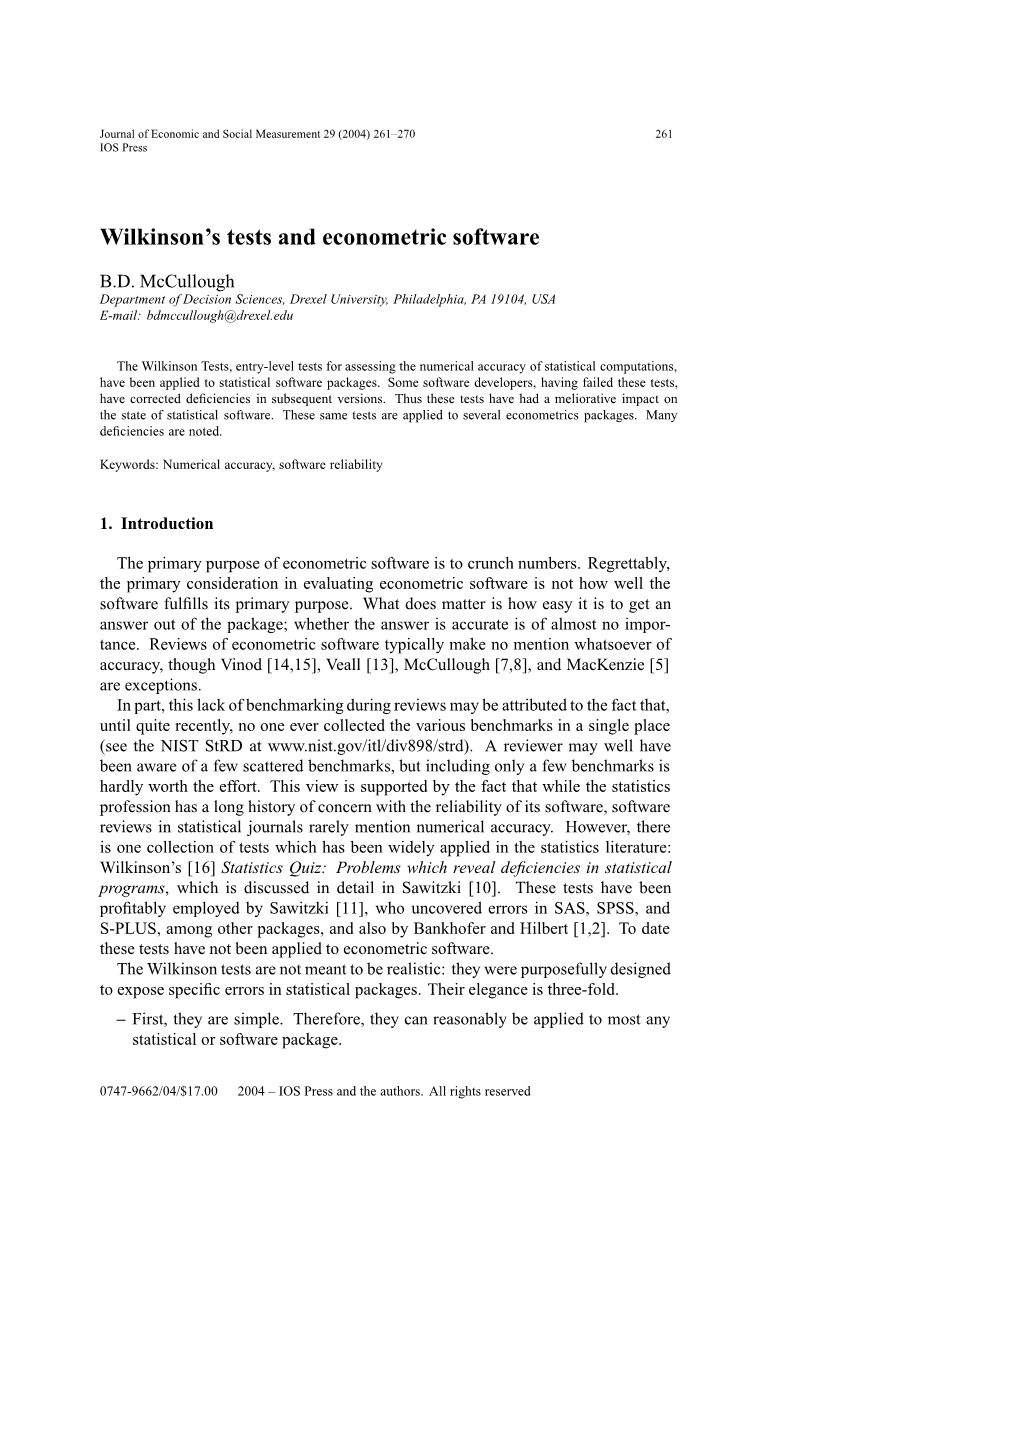 Wilkinson's Tests and Econometric Software